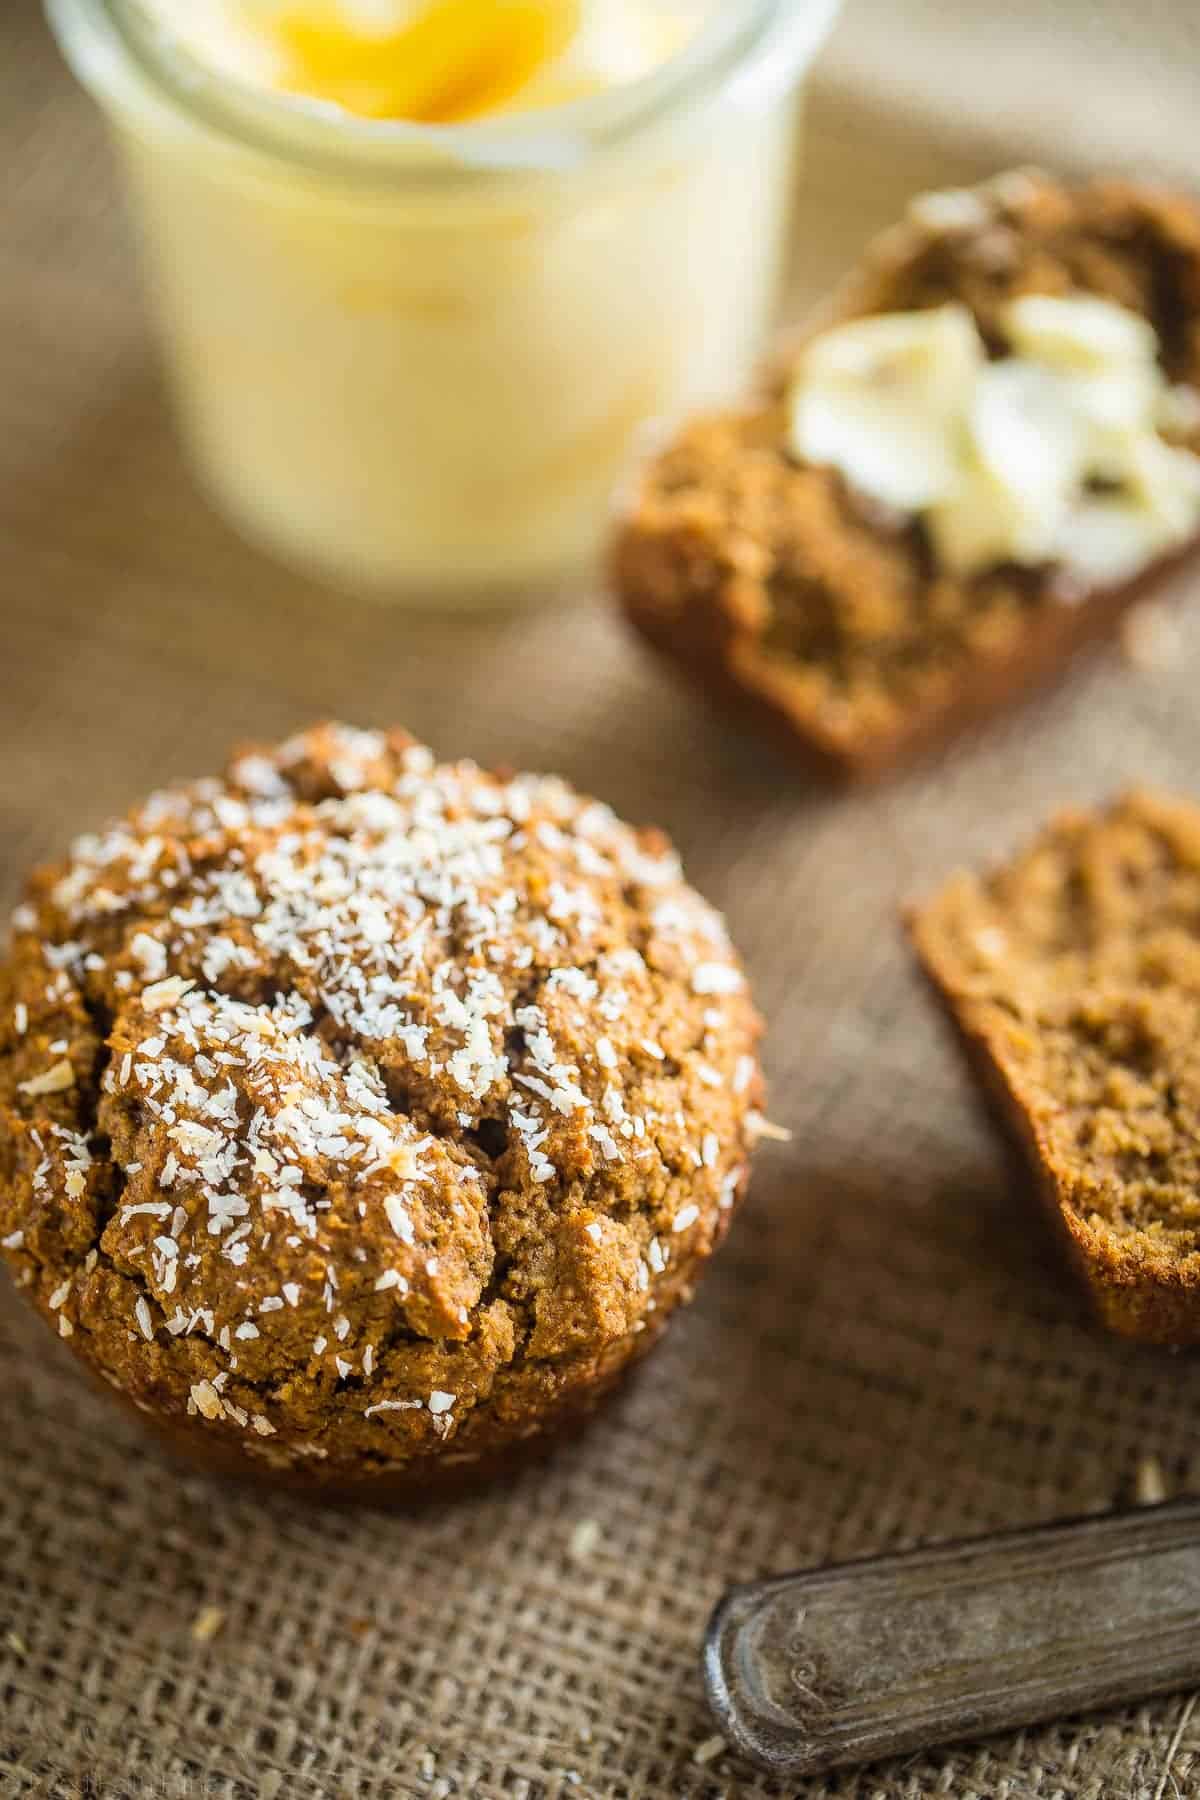 Gluten Free Vegan Vanilla Chai Protein Muffins - These are muffins are loaded with spicy-sweet chai flavor, protein and are SO easy to make! Perfect for a portable, healthy breakfast or snack that freezes well! | Foodfaithfitness.com | @FoodFaithFit